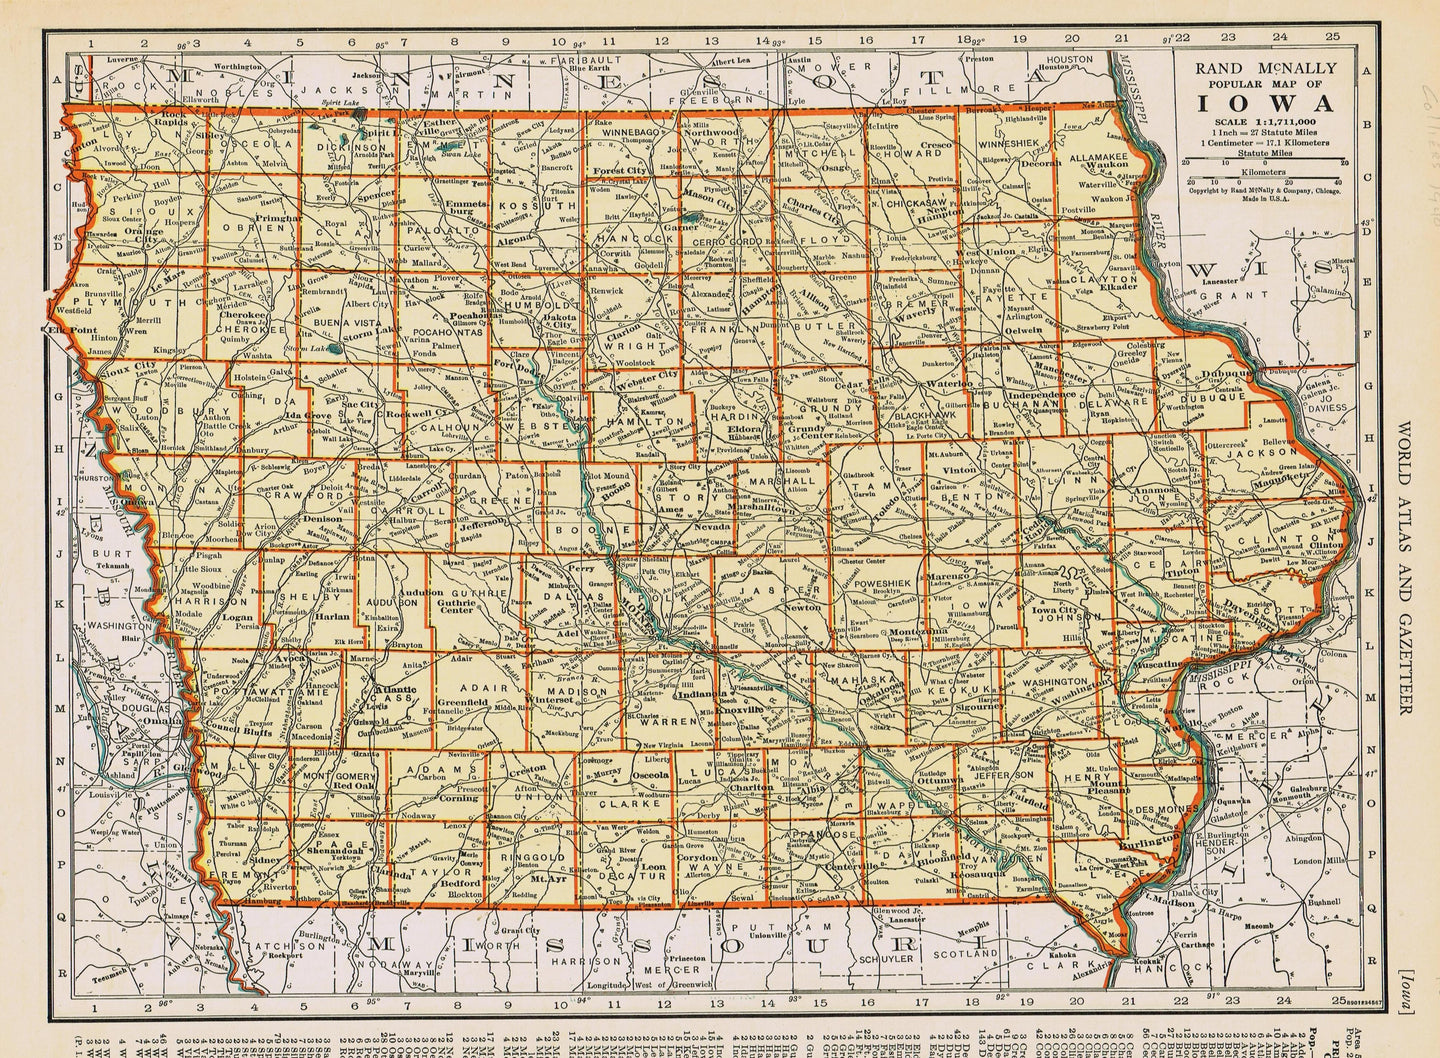 Genuine-Antique-Map-Popular-Map-of-Iowa--1940-Rand-McNally-Maps-Of-Antiquity